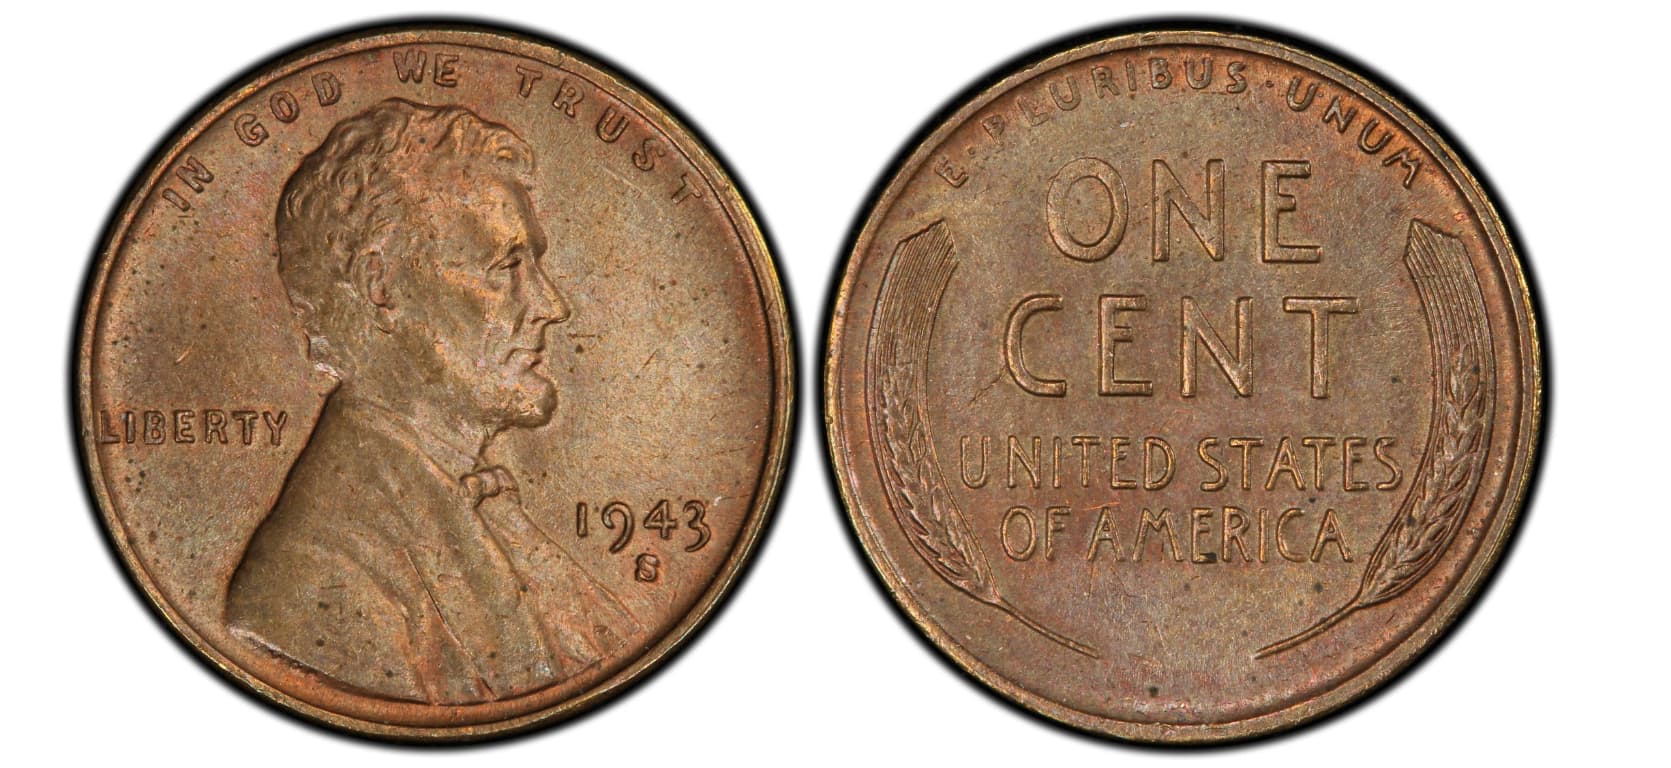 old penny values